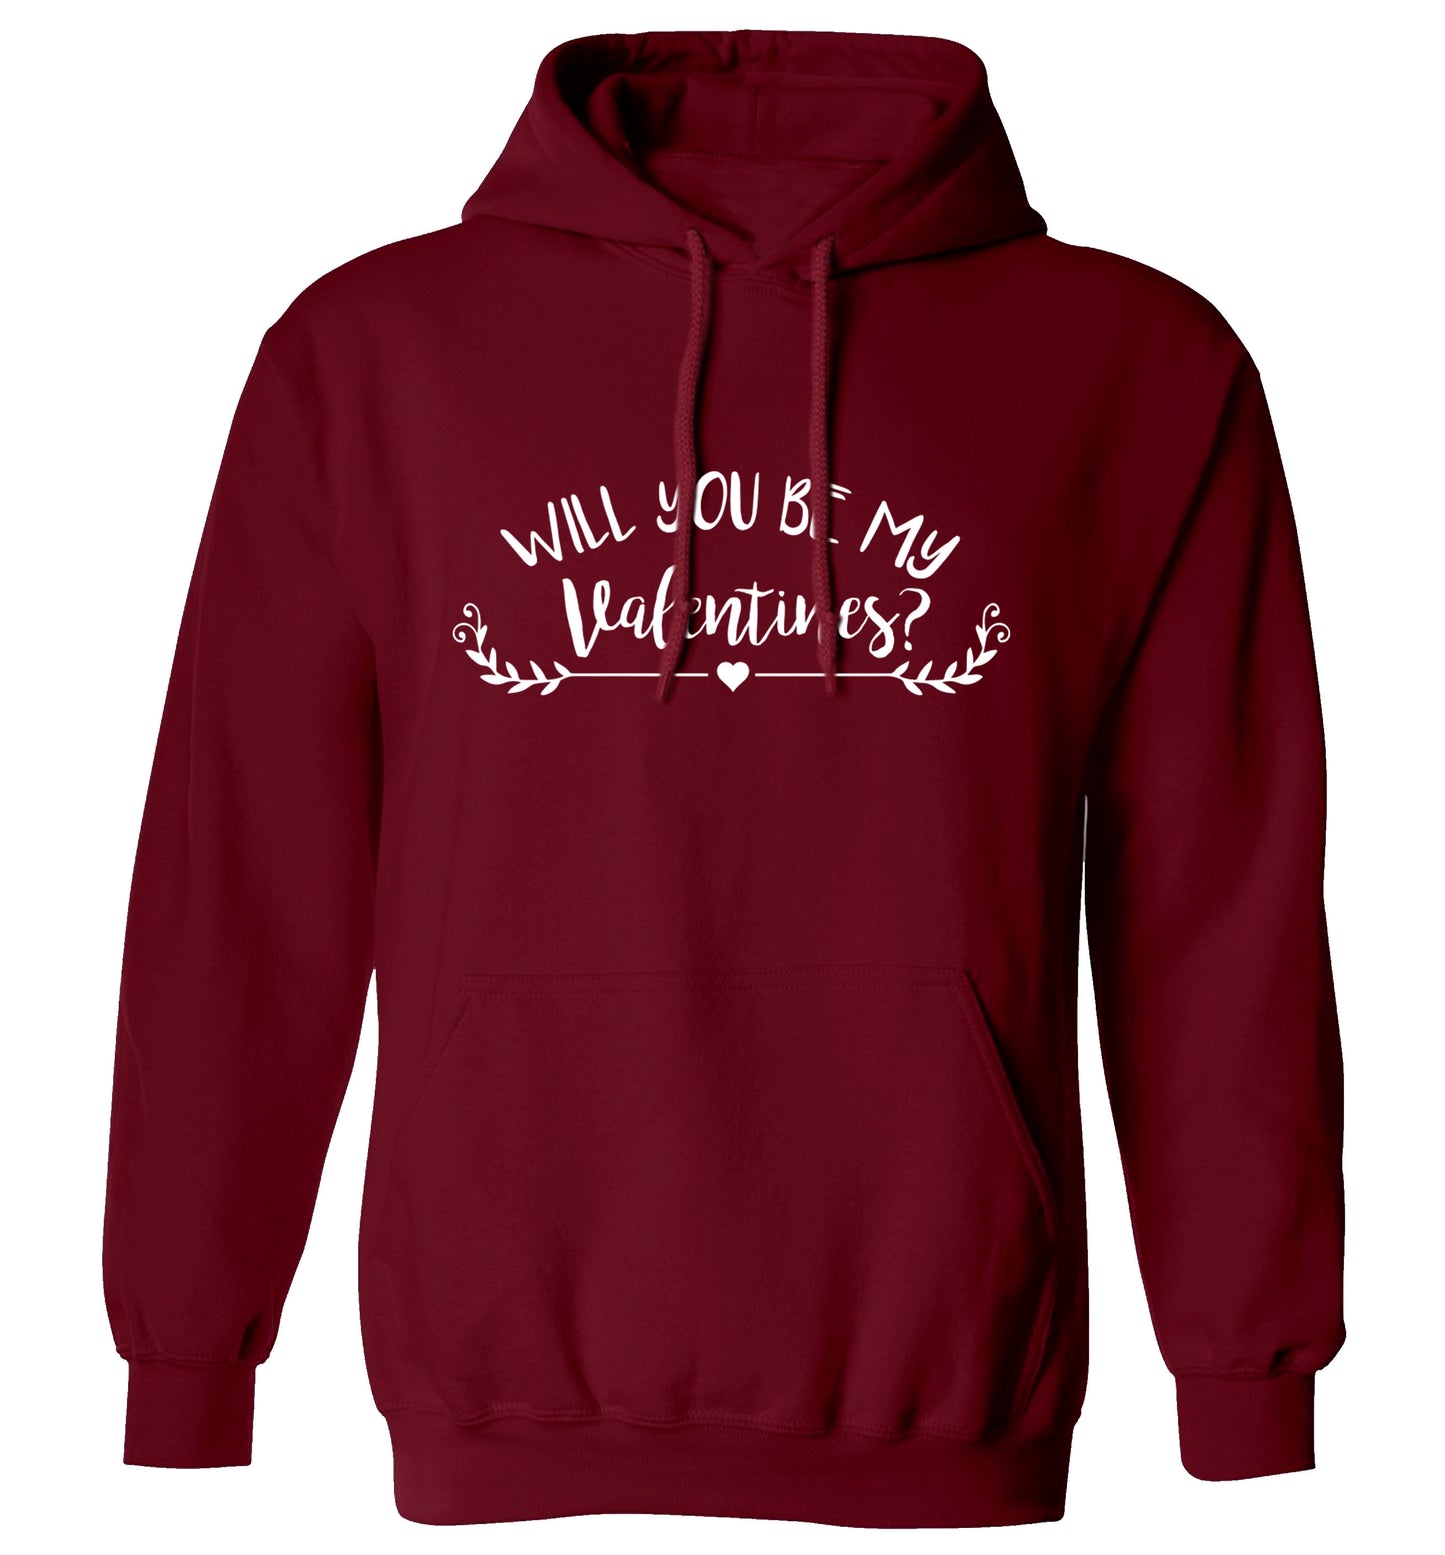 Will you be my valentines? adults unisex maroon hoodie 2XL